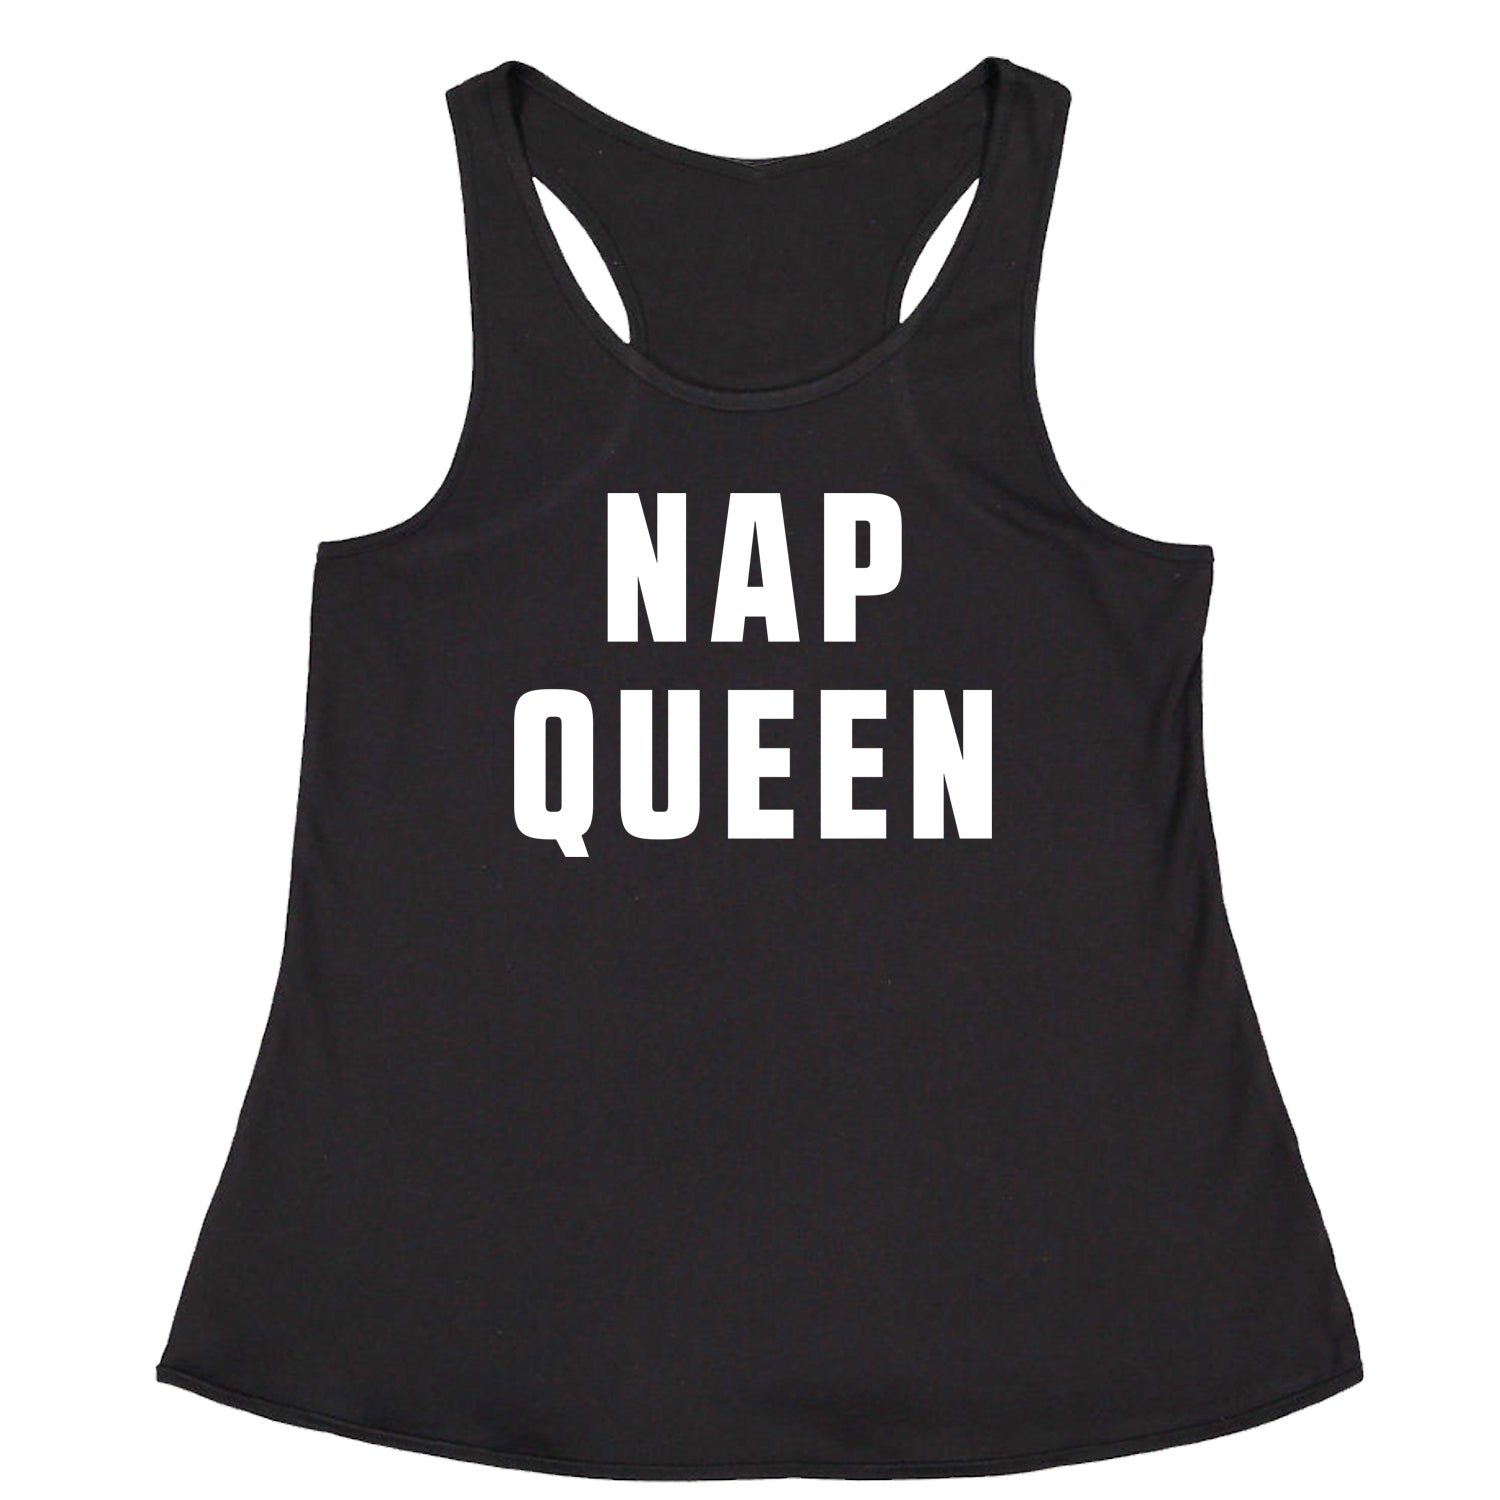 Nap Queen (White Print) Comfy Top For Lazy Days Racerback Tank Top for Women all, day, function, lazy, nap, pajamas, queen, siesta, sleep, tired, to, too by Expression Tees